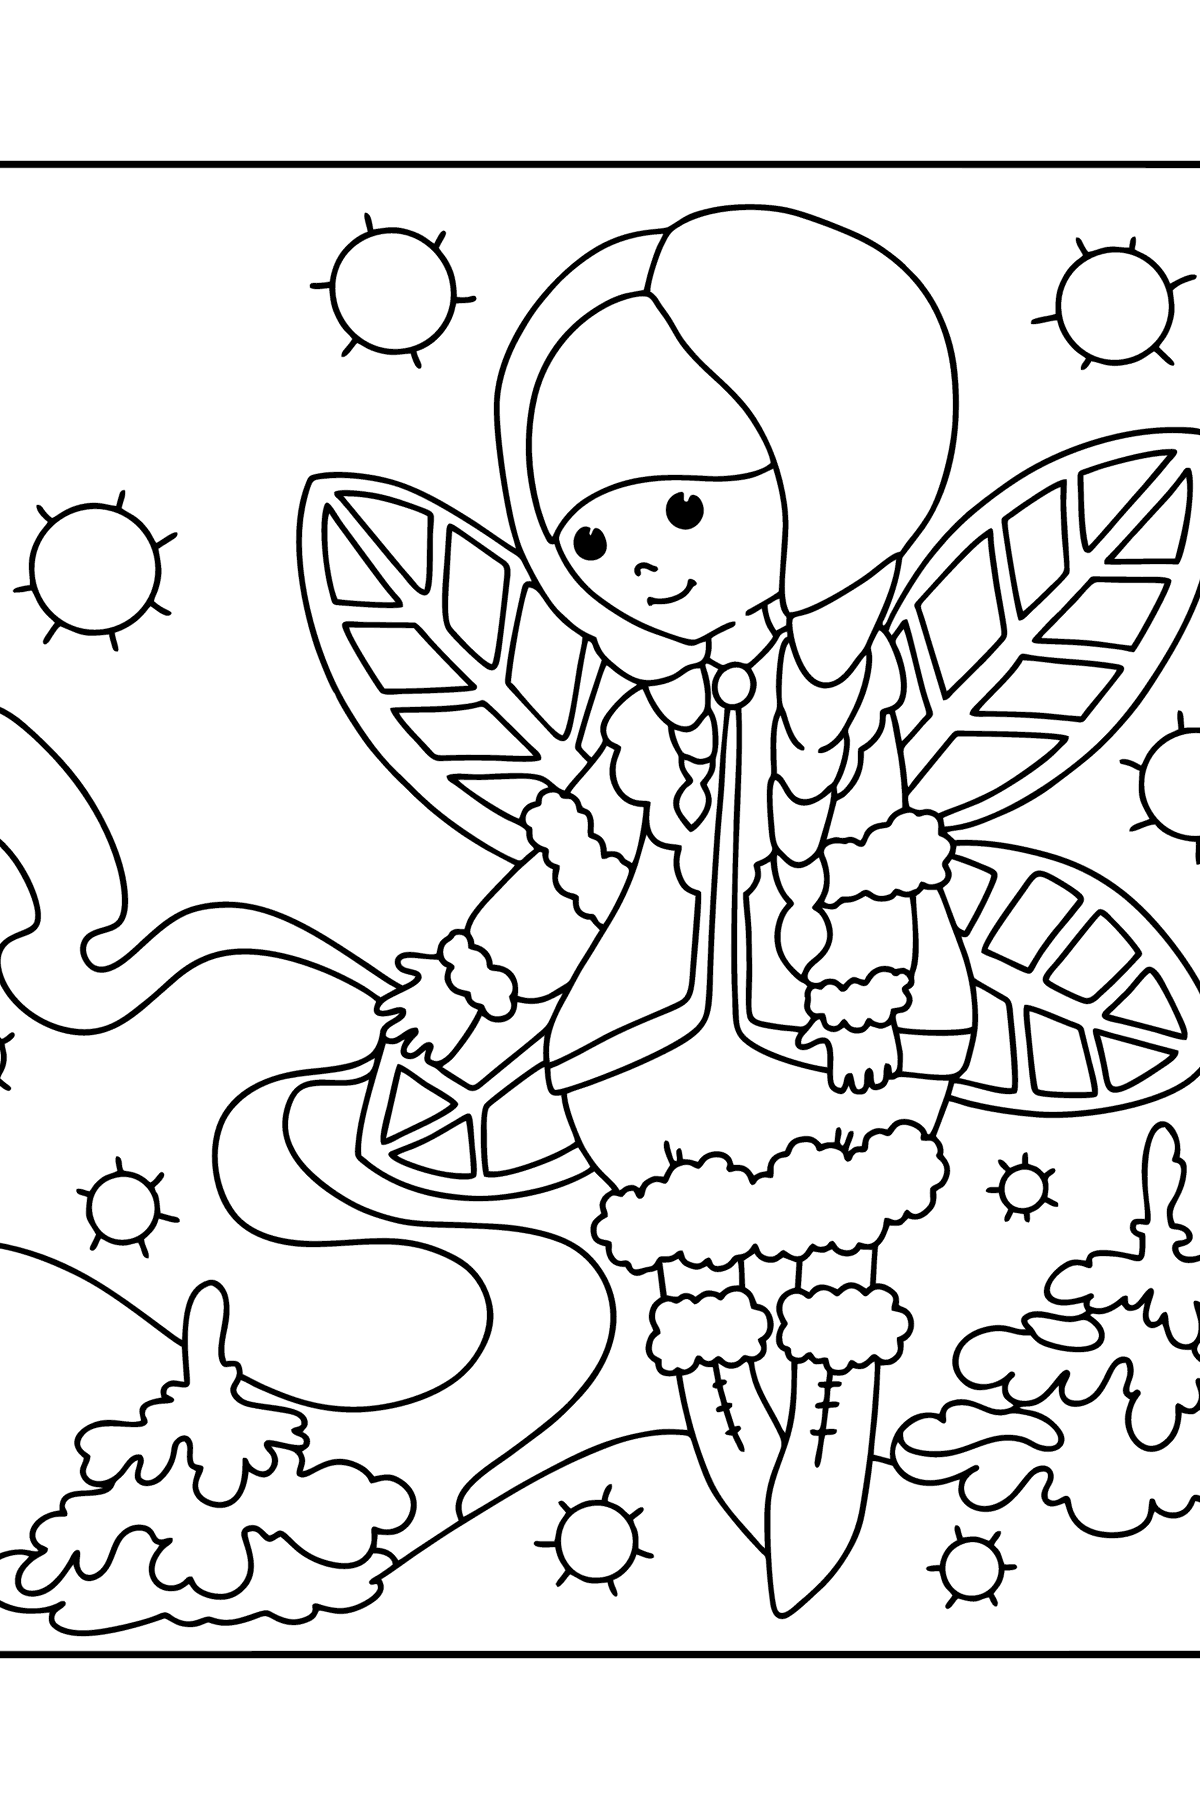 Winter Fairy coloring page - Coloring Pages for Kids